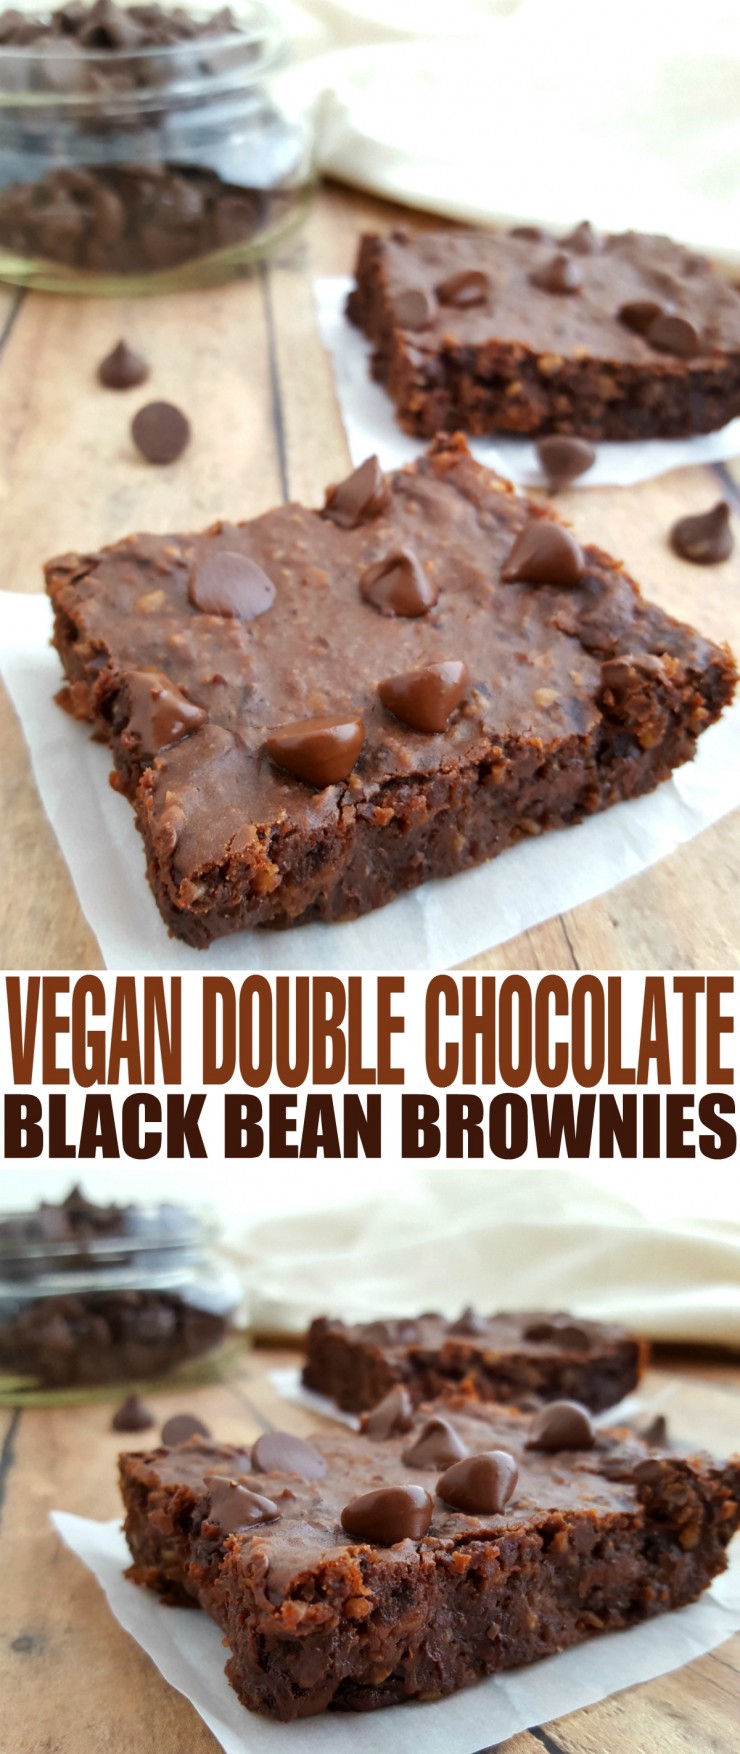 These Vegan Double Chocolate Black Bean Brownies are a healthier take on the traditional brownie. It's a wonderful treat for vegans but everyone else is sure to love it too!